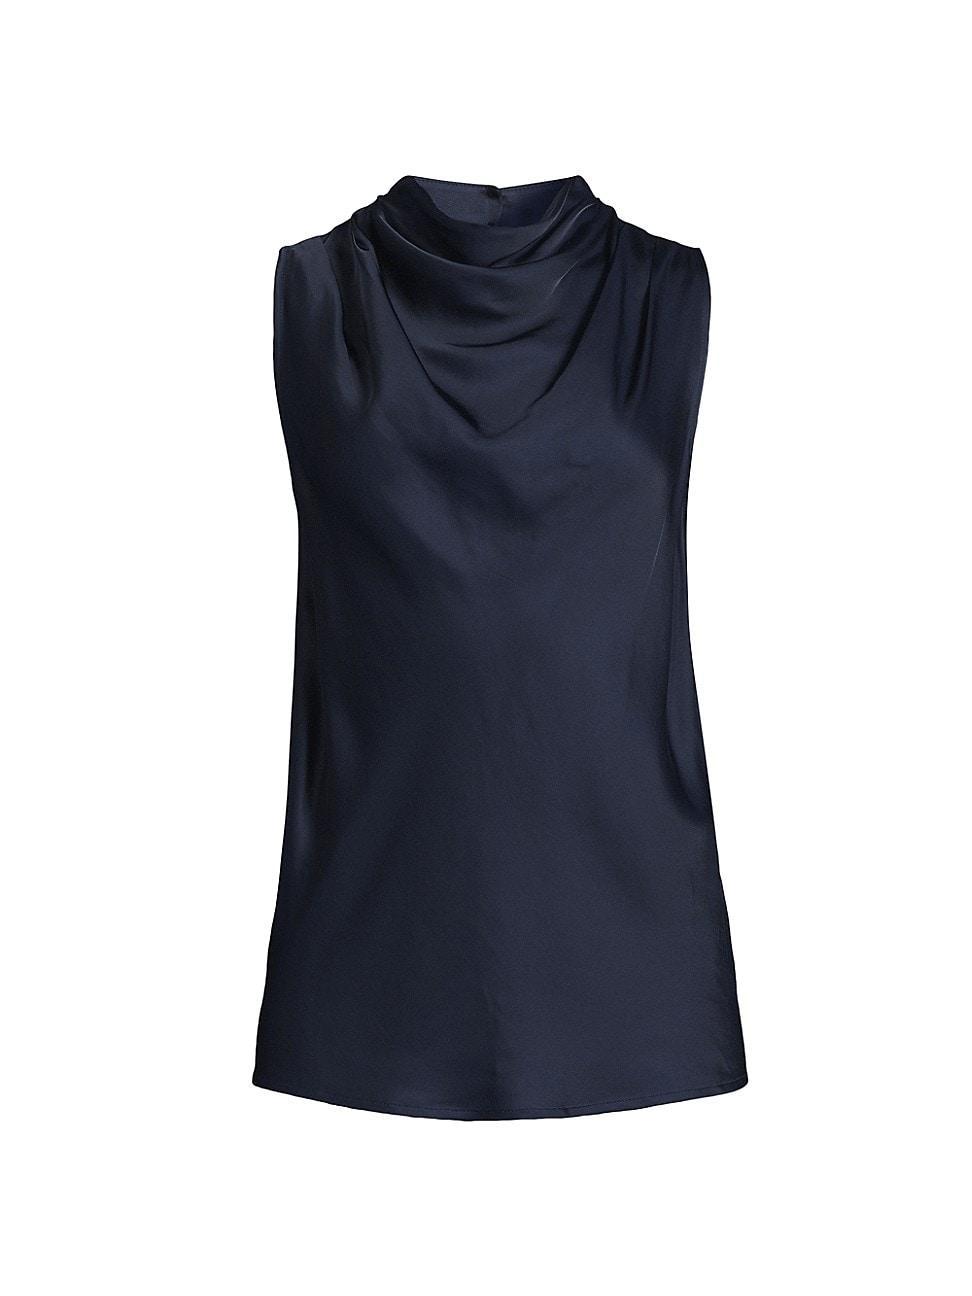 Womens Mika Satin Cowlneck Sleeveless Top Product Image